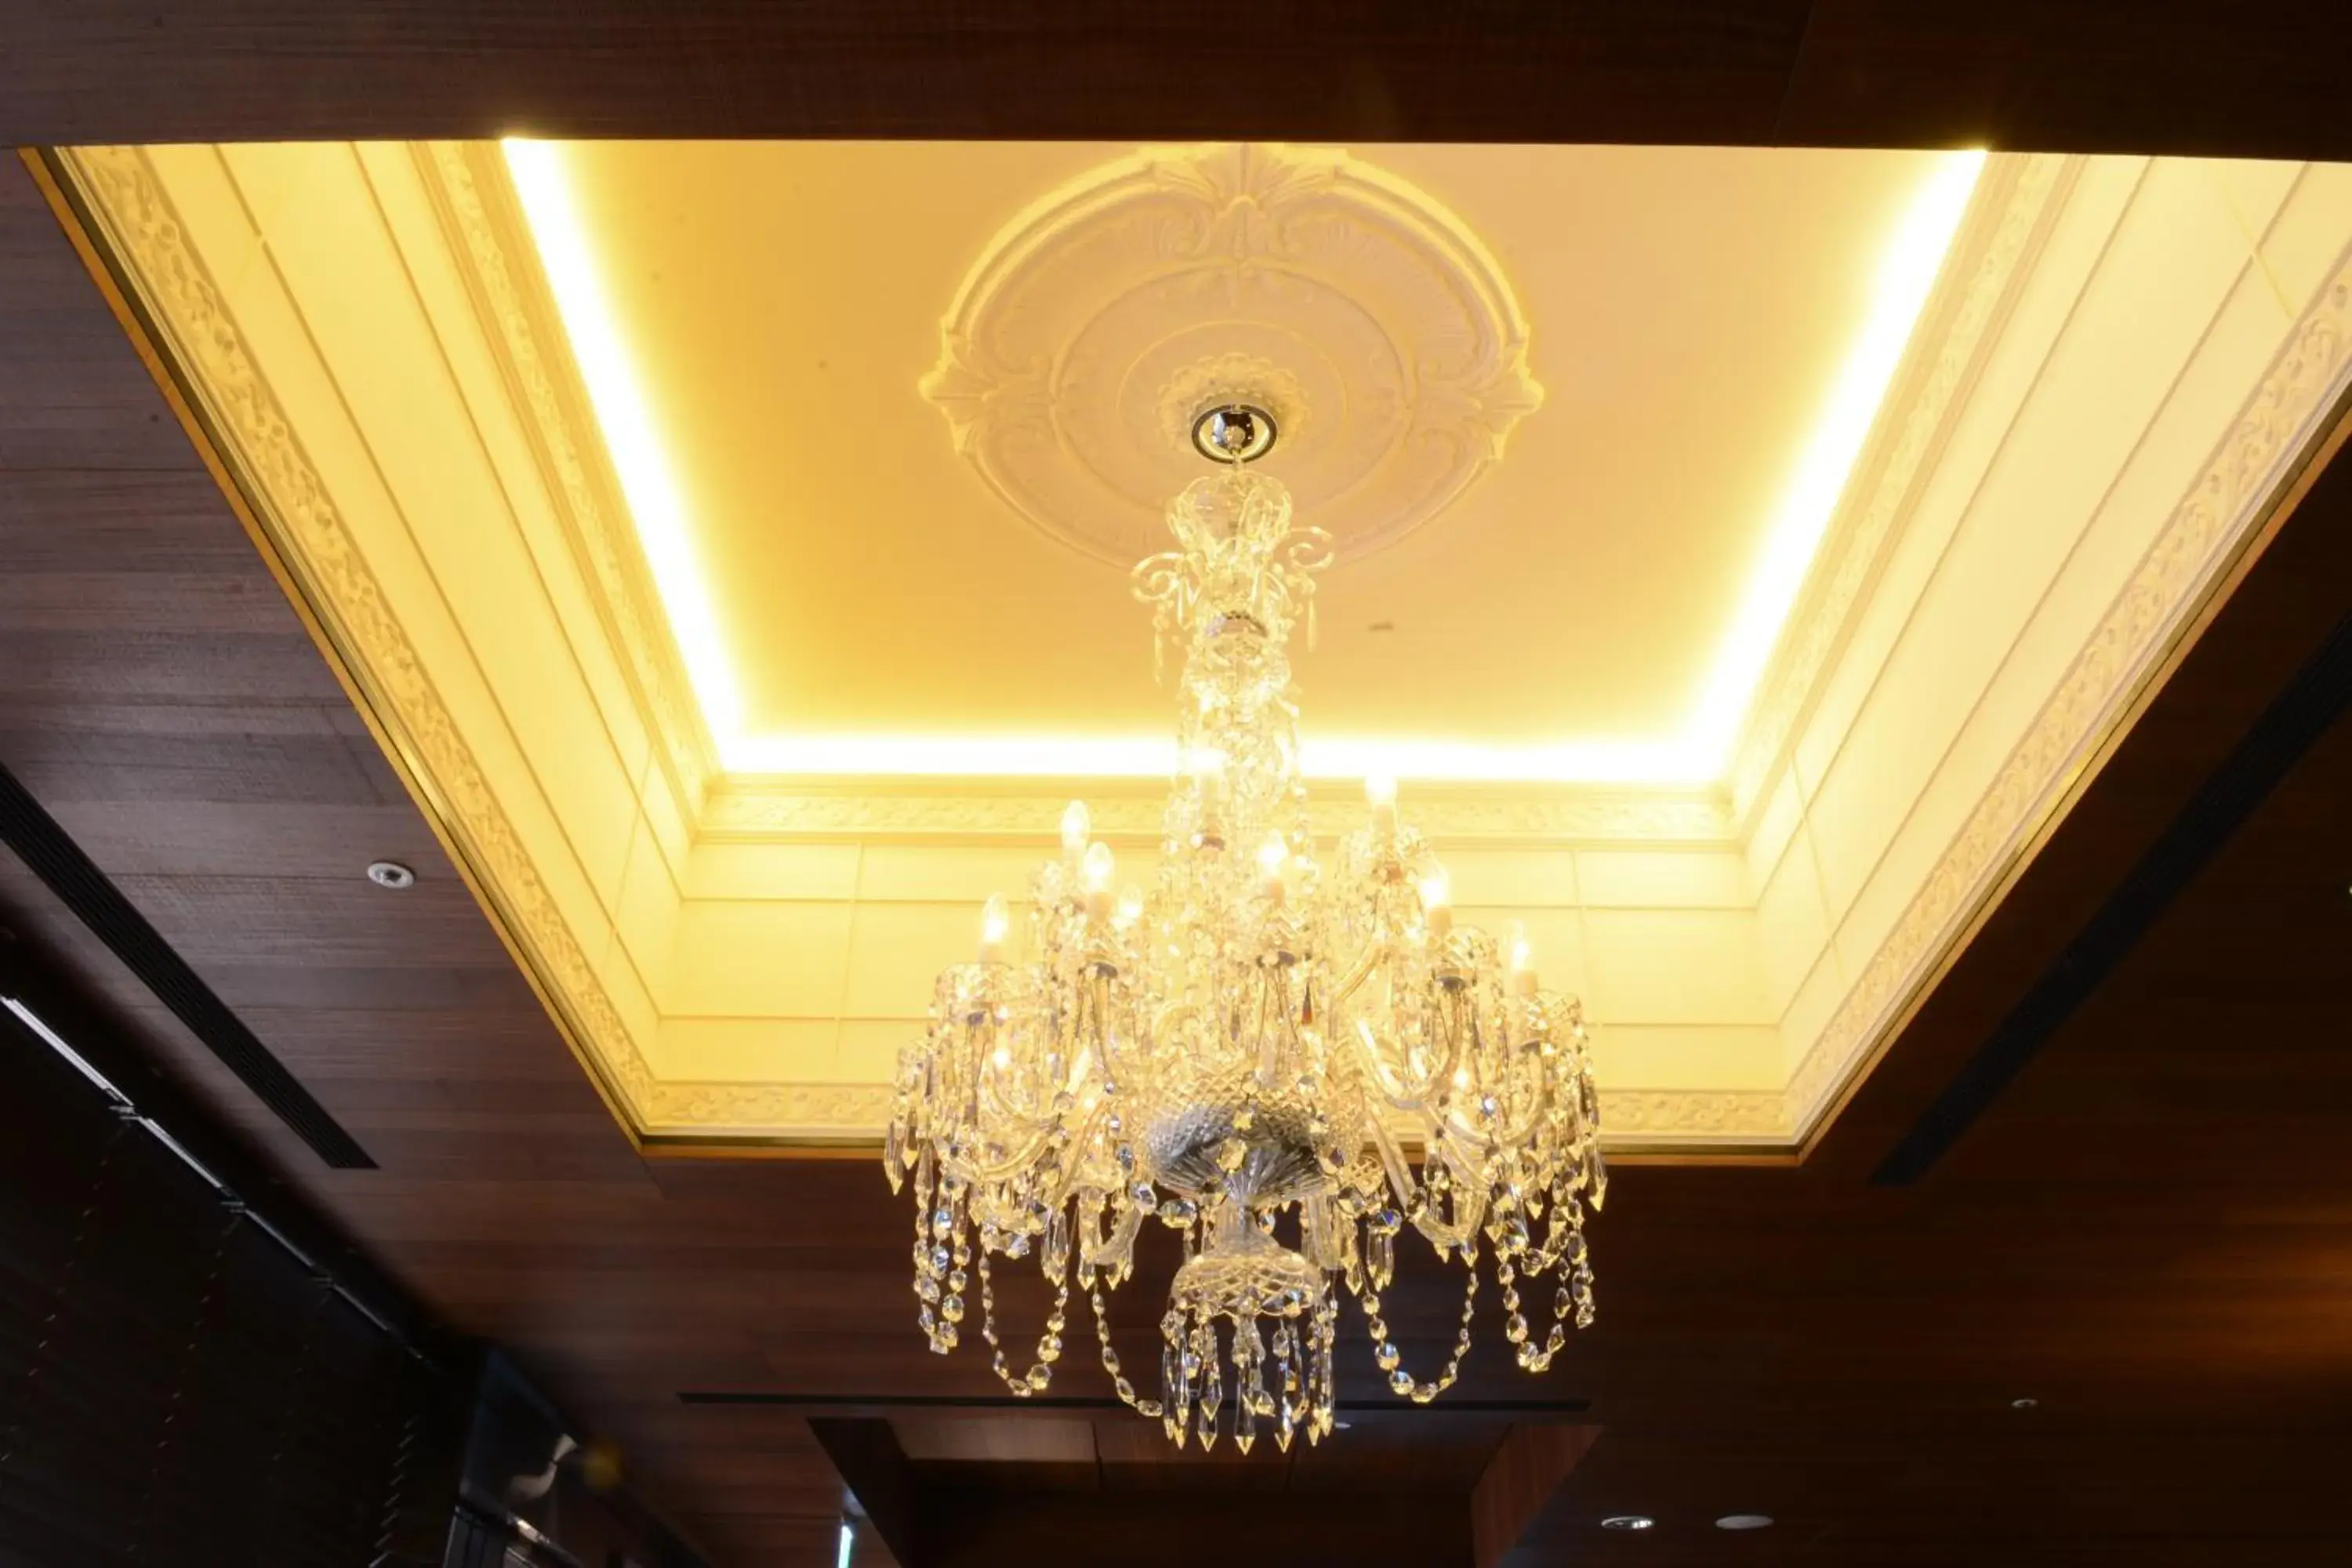 Decorative detail, Banquet Facilities in Inhouse Hotel Taichung